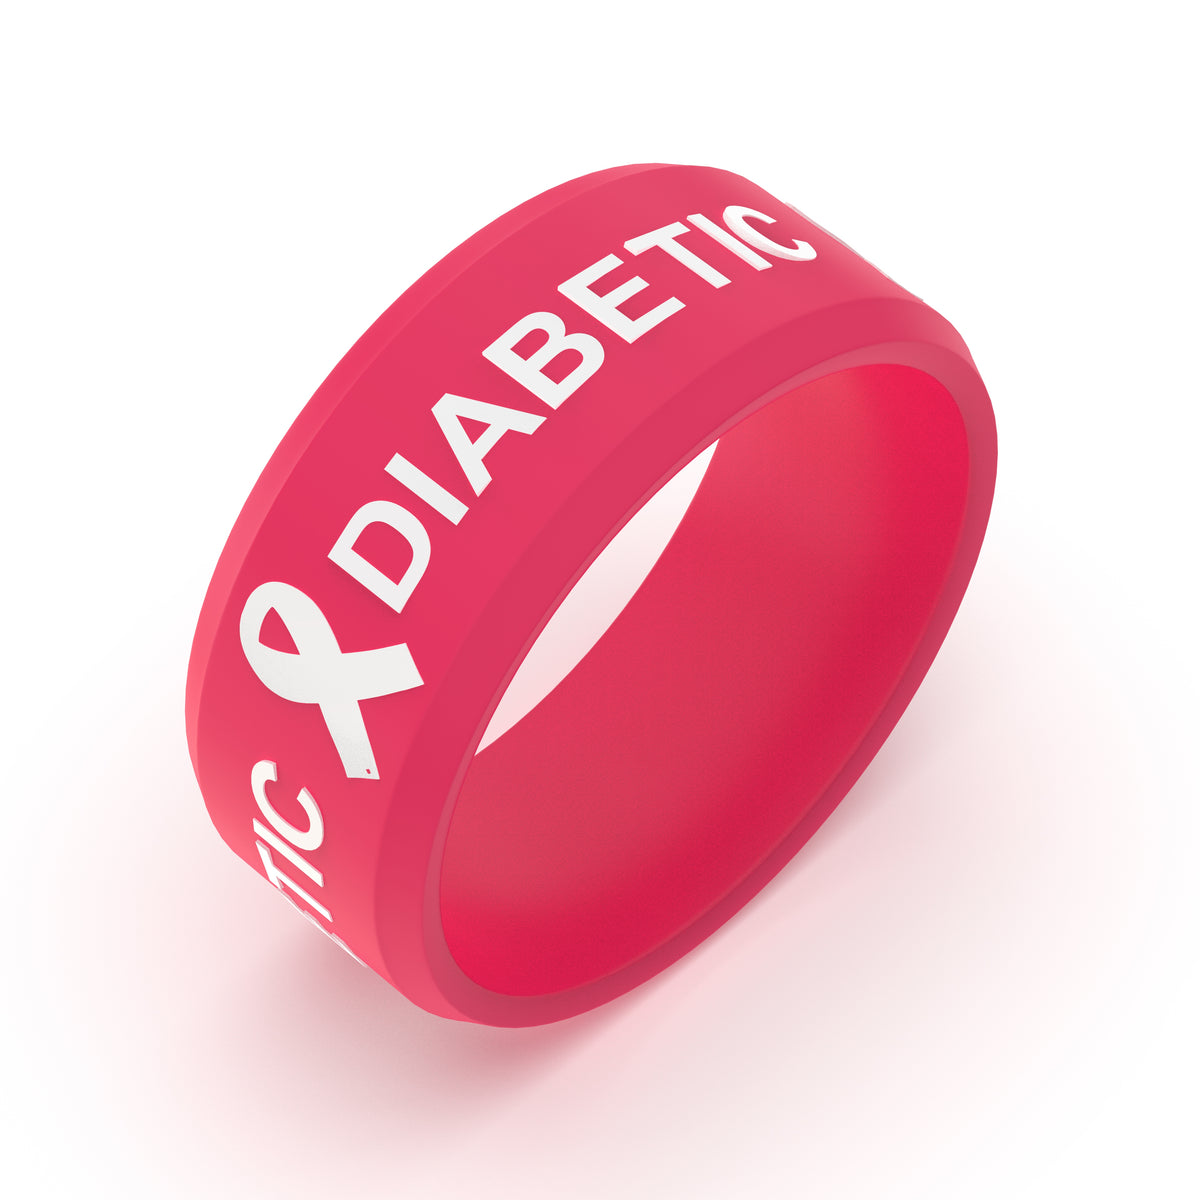 FREE Magenta Silicone Diabetic Ring - Just Pay Shipping